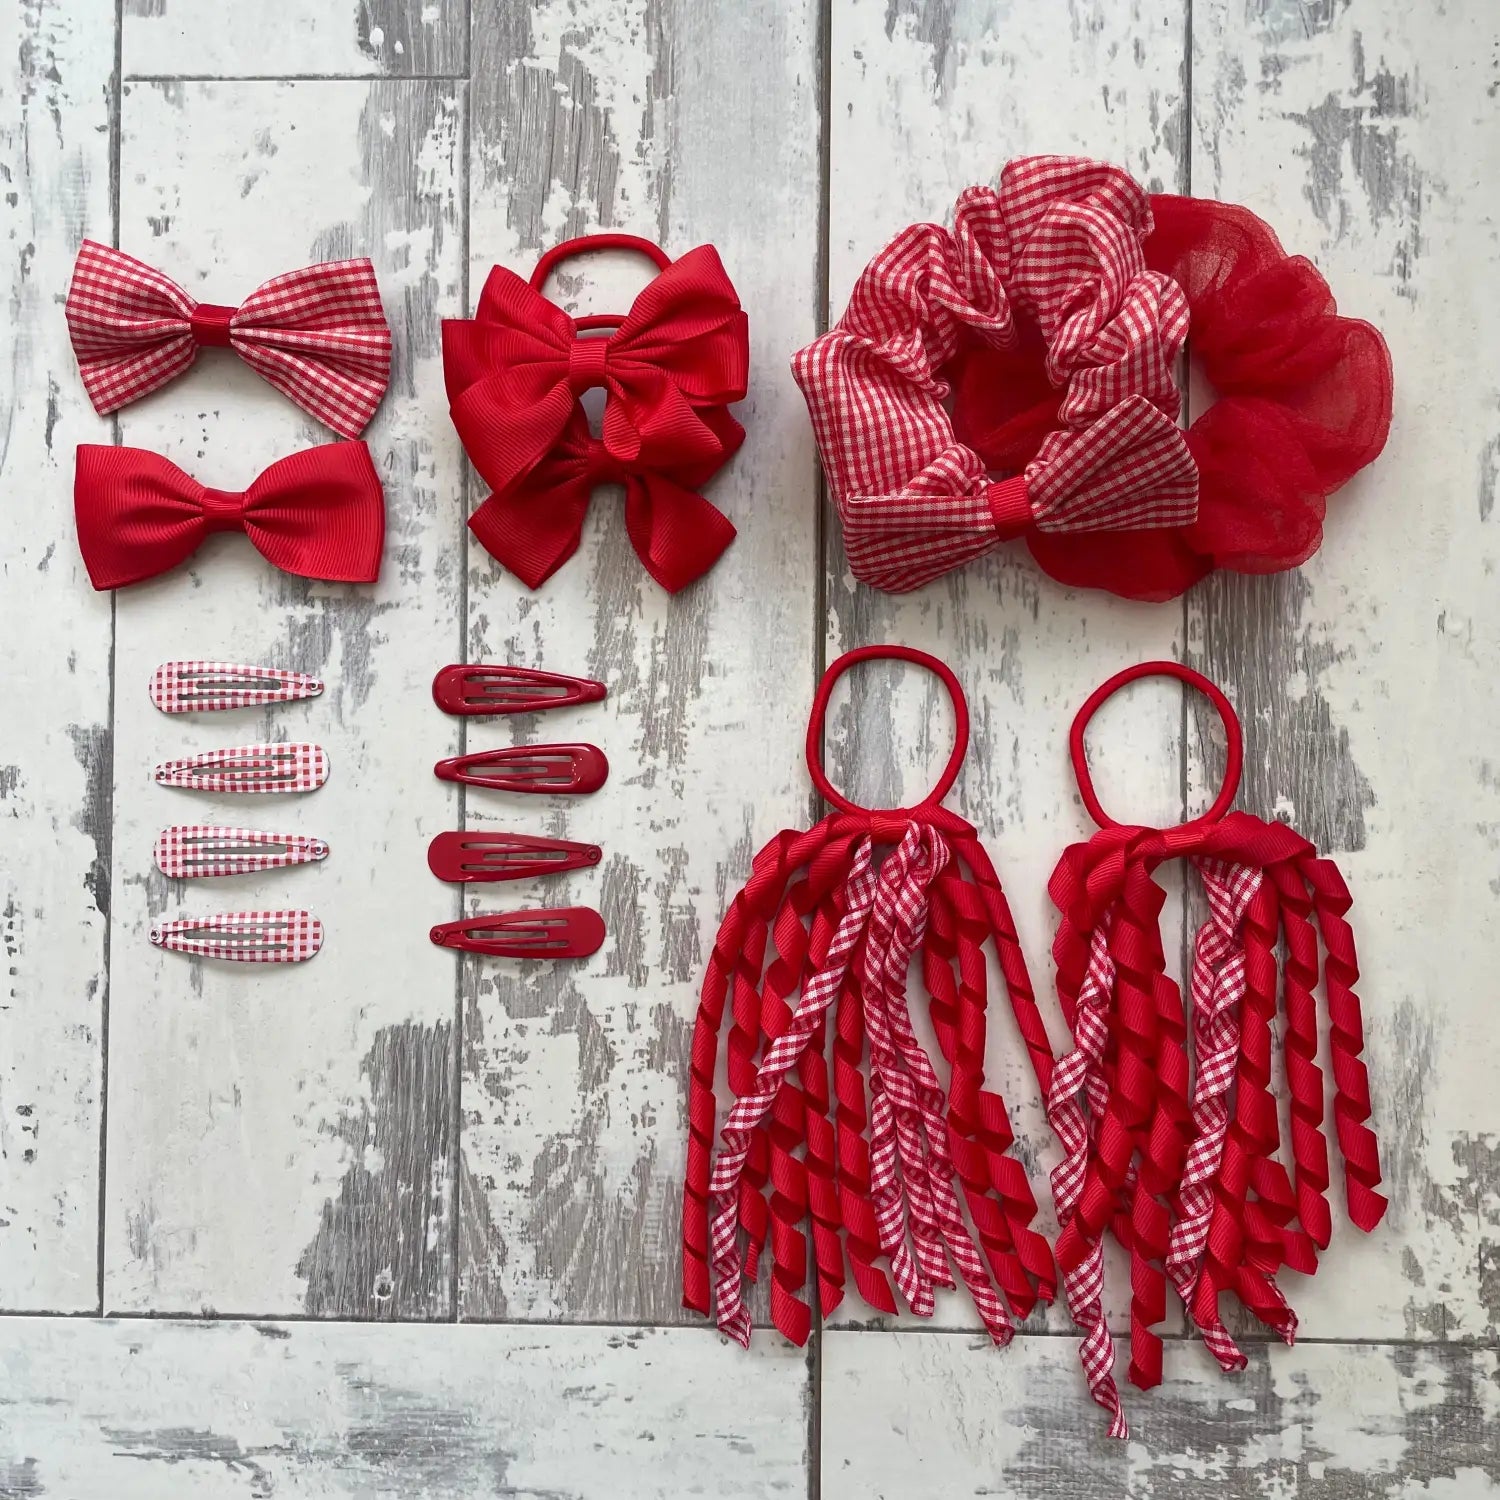 Red gingham hair bow set displayed in 16PCS Gingham Check School Girl Hair Accessories Set.